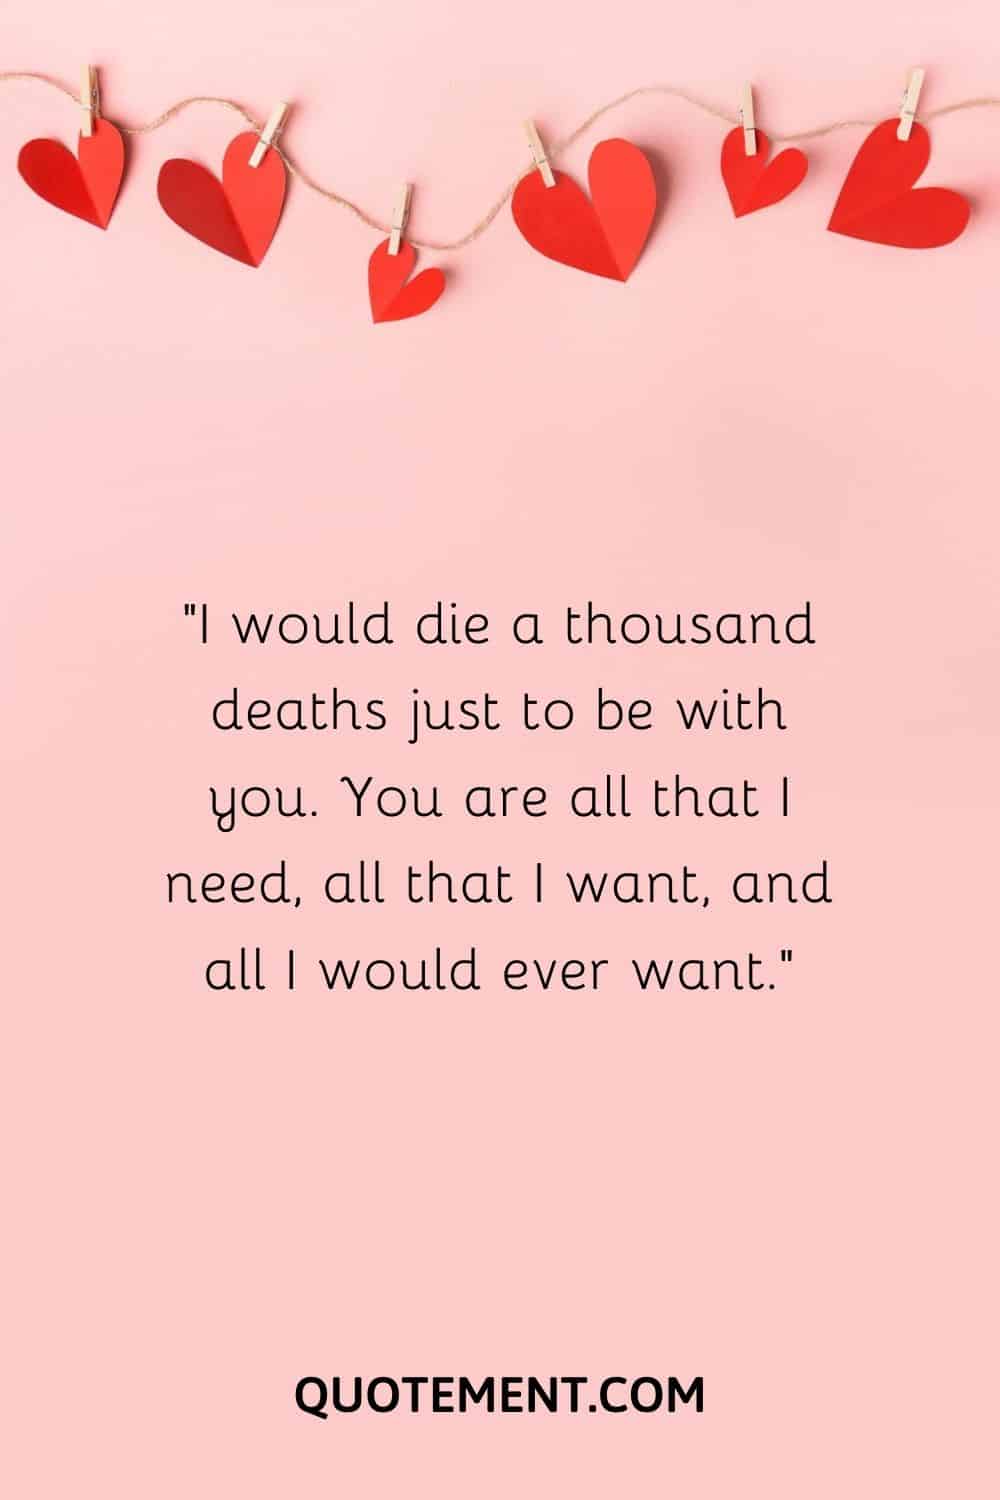 I would die a thousand deaths just to be with you